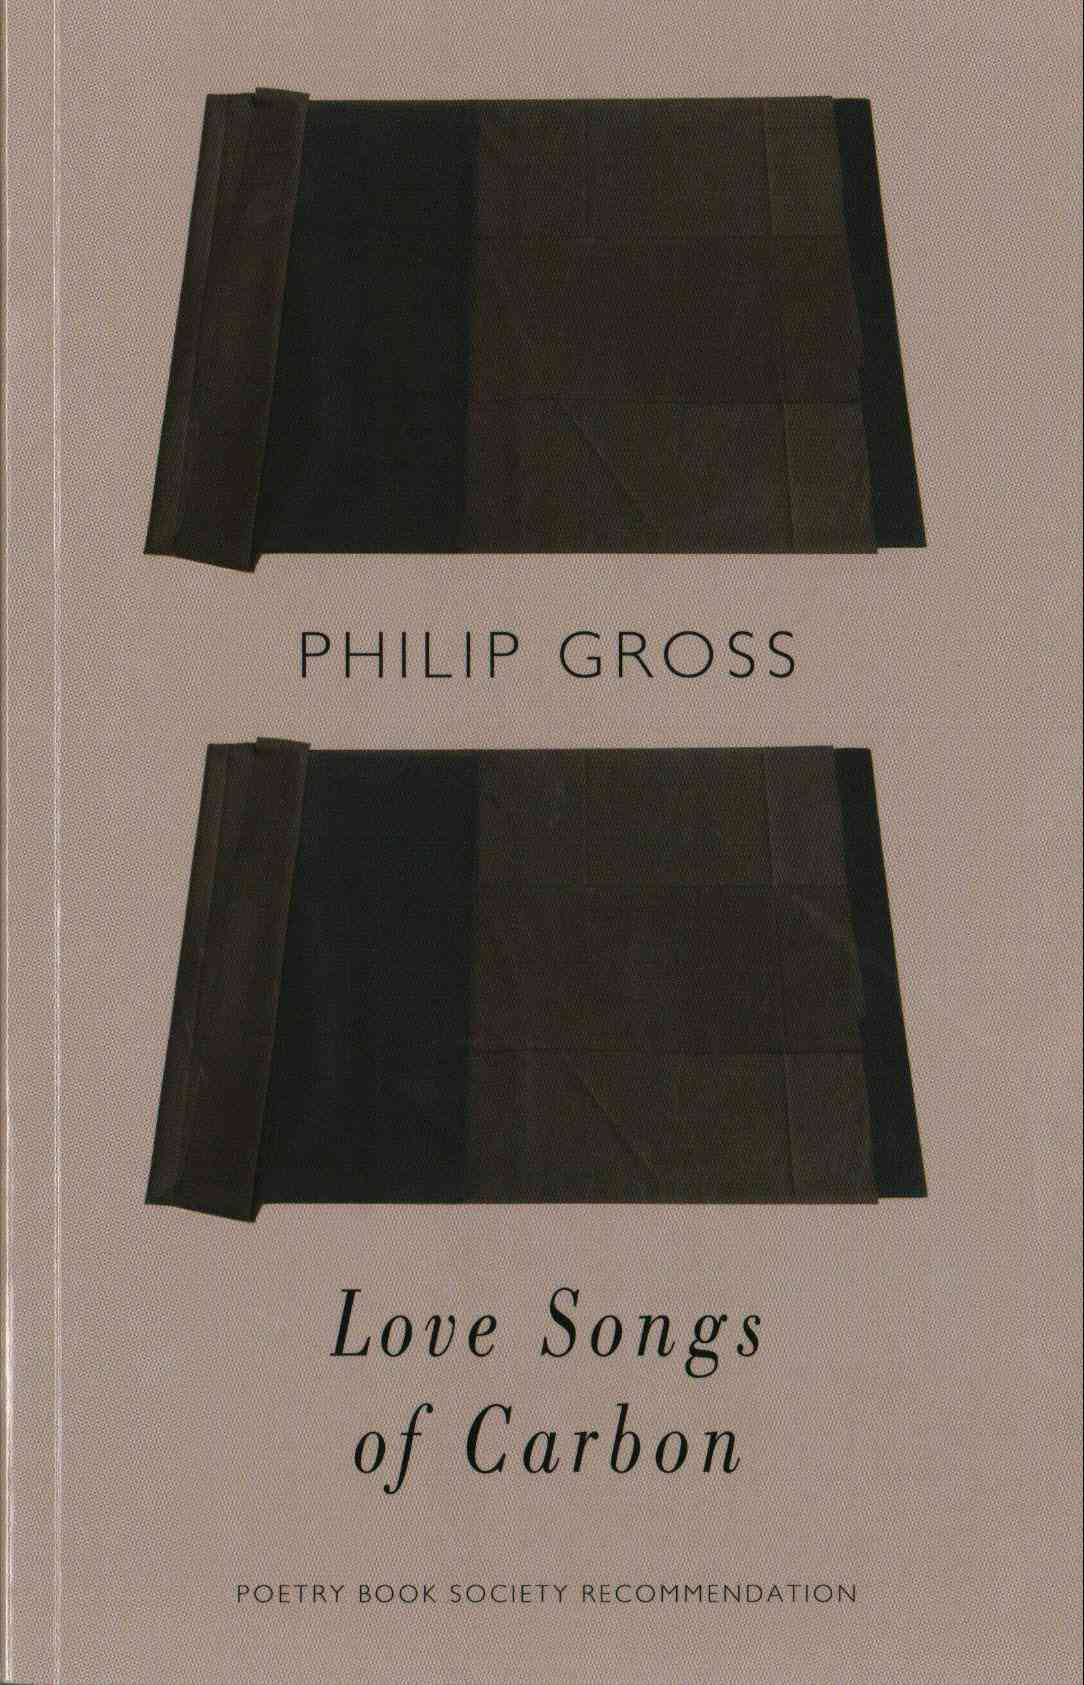 Featured image of Love Songs of Carbon